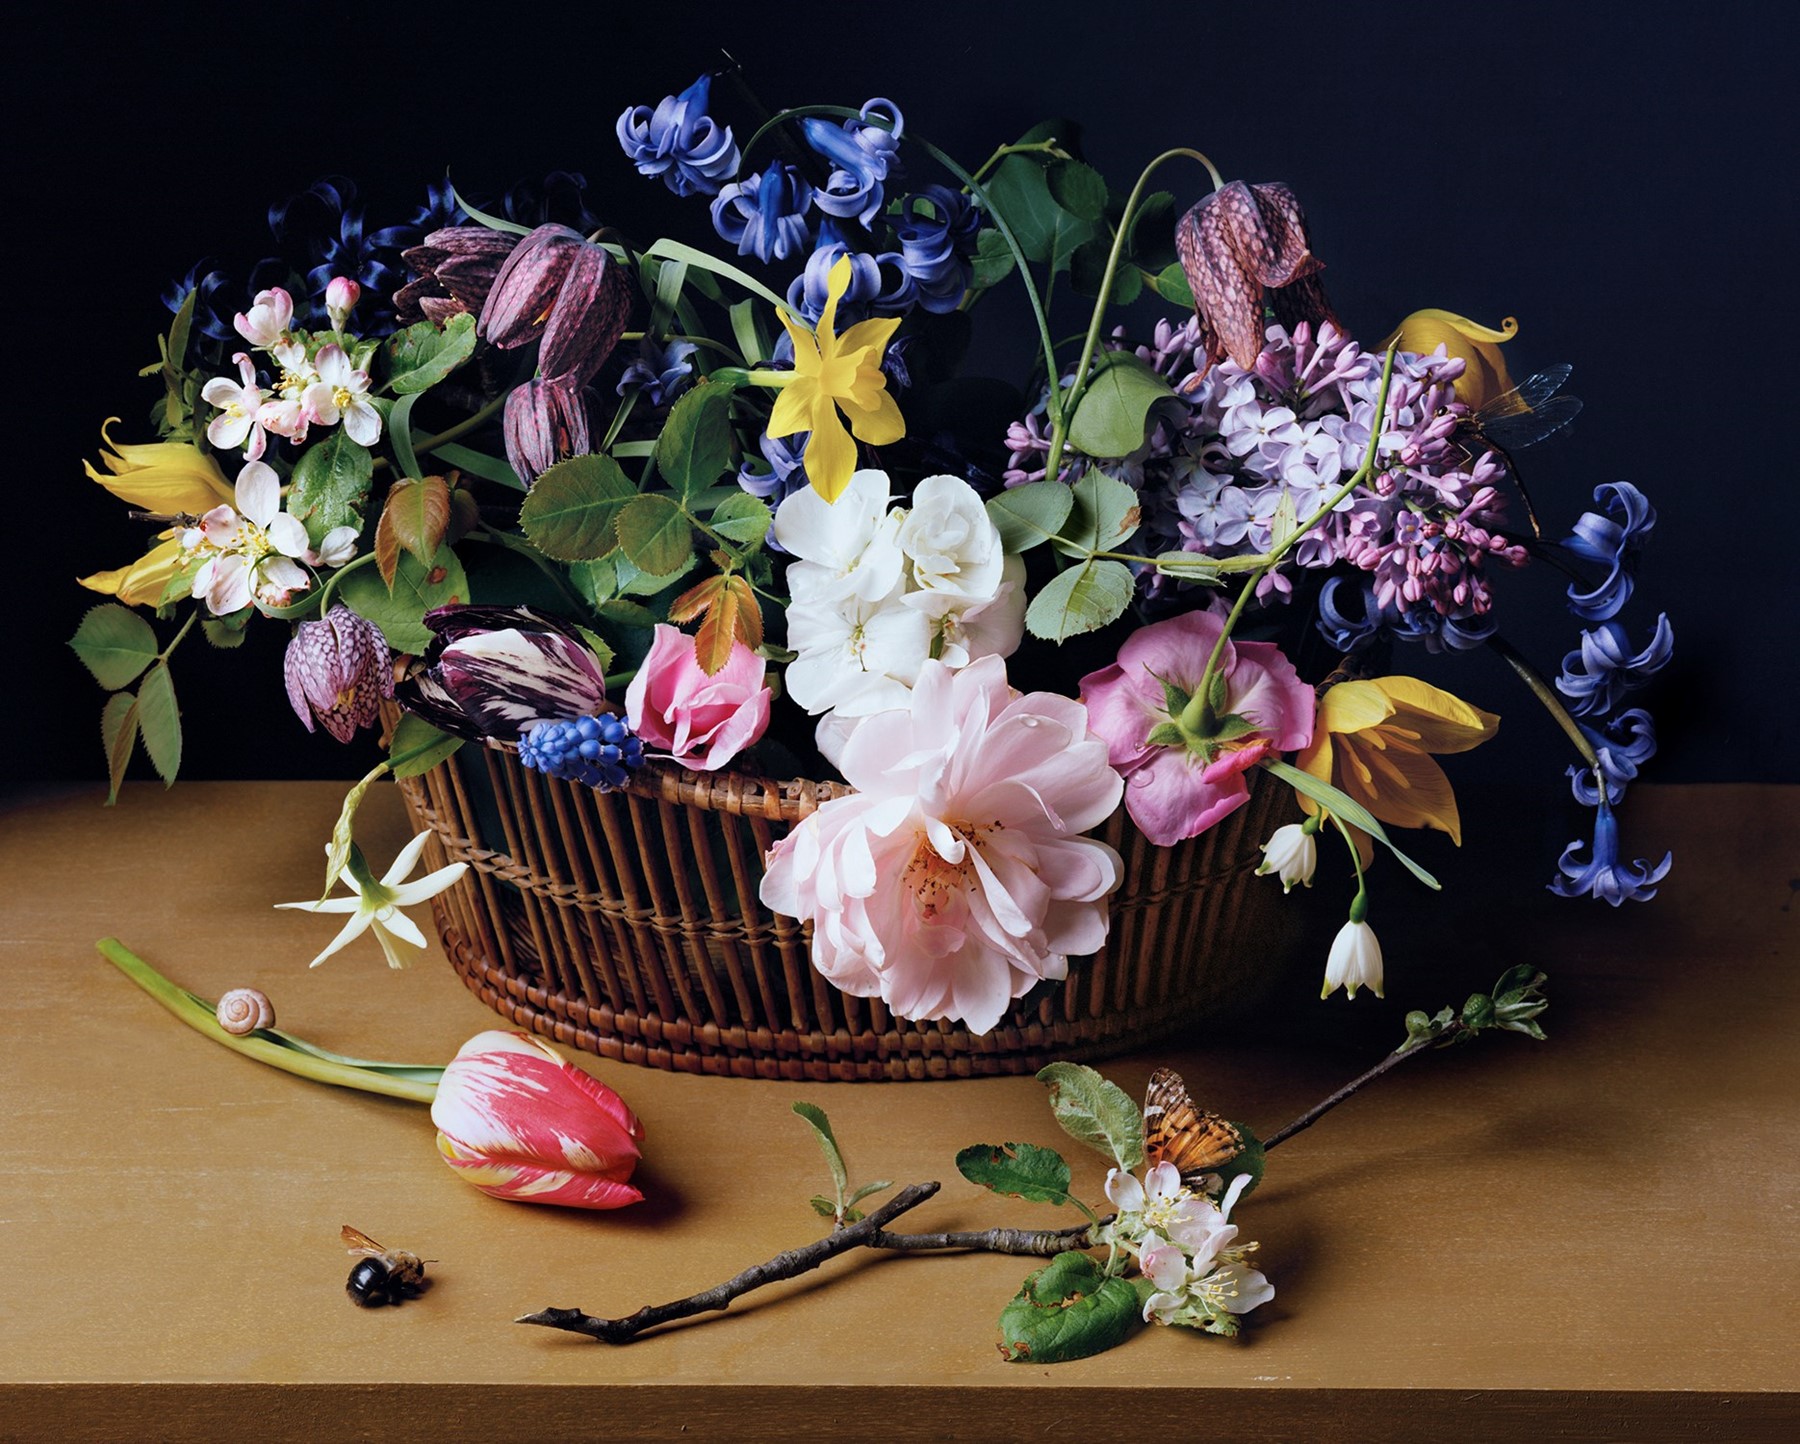 Trompe l'Oeil Photographs Recreating Floral Still Life Paintings | AnOther